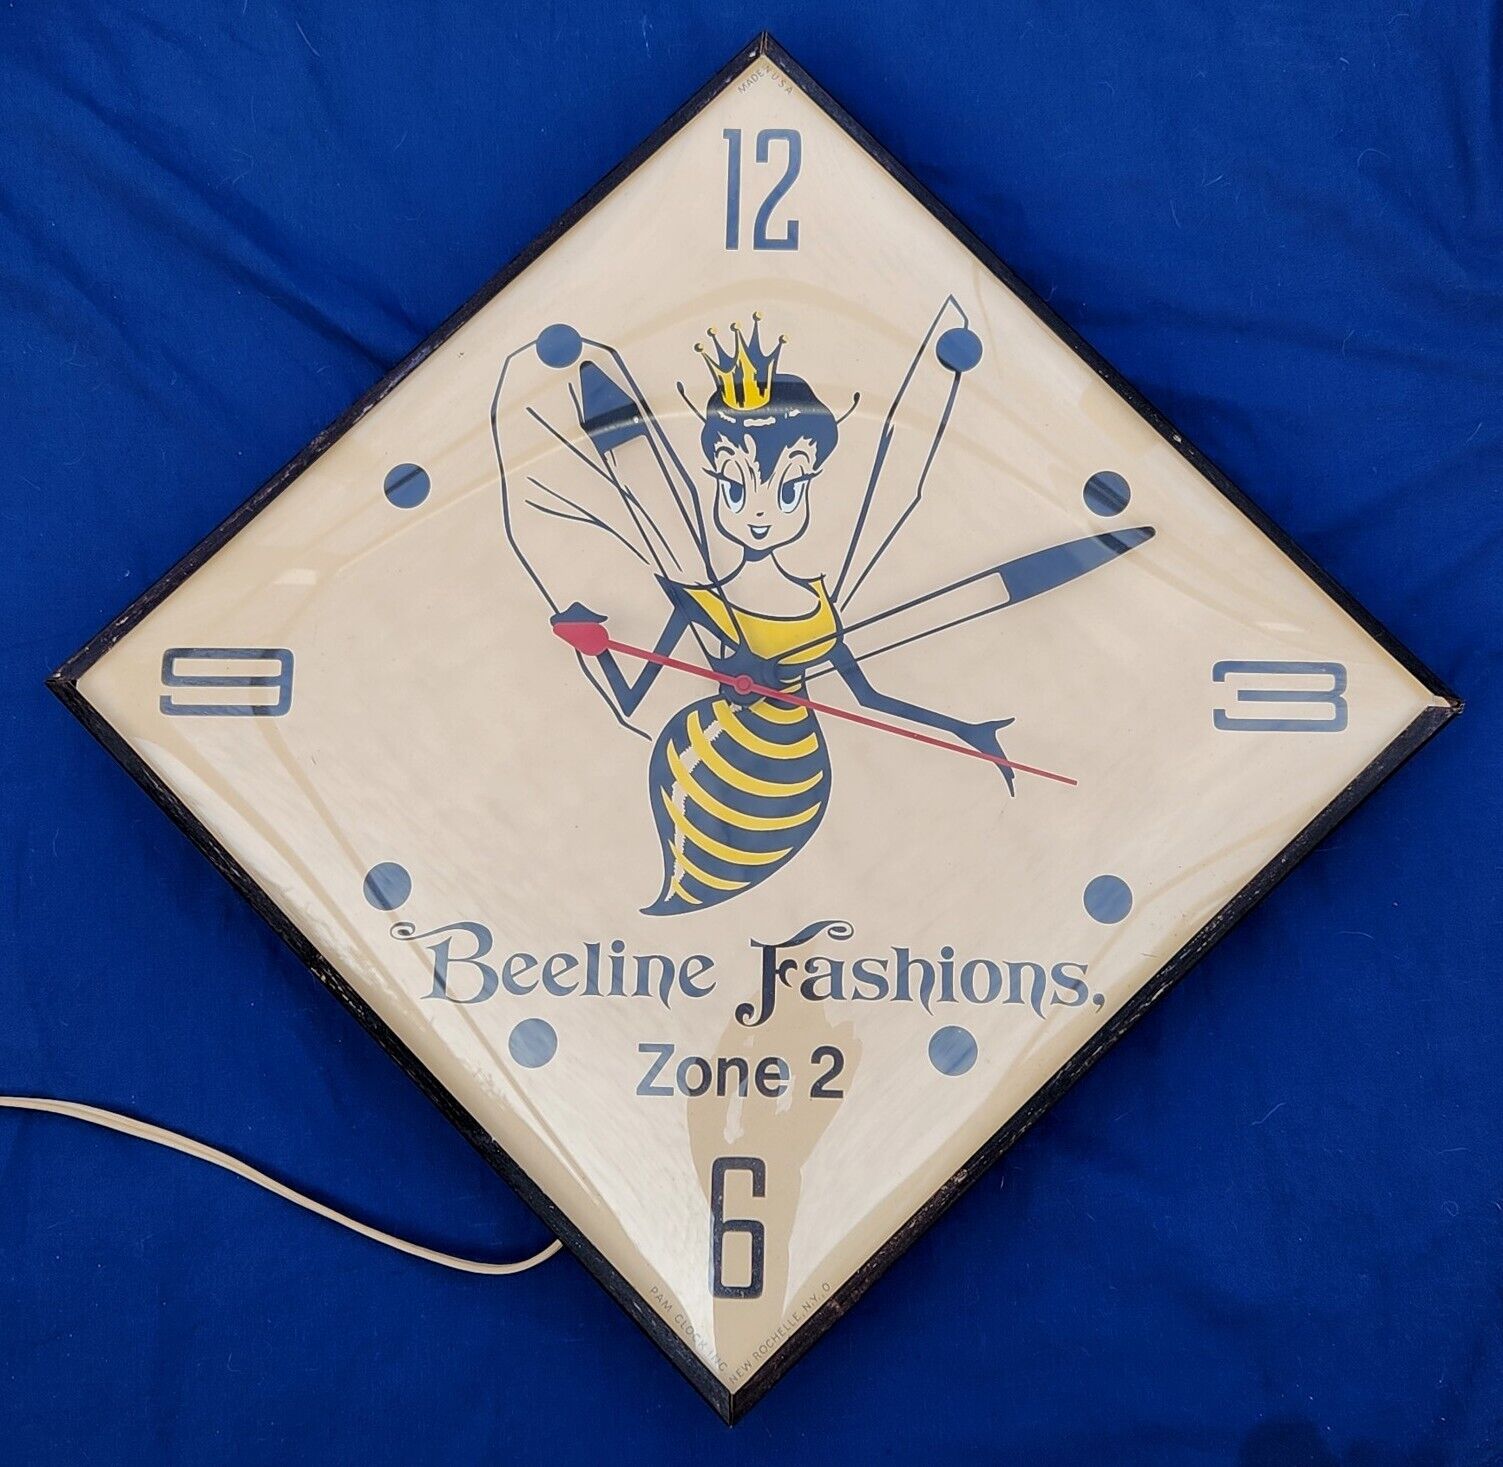 Rare Vintage Beeline Fashions Zone 2 Pam Electric Advertising Wall Clock Works